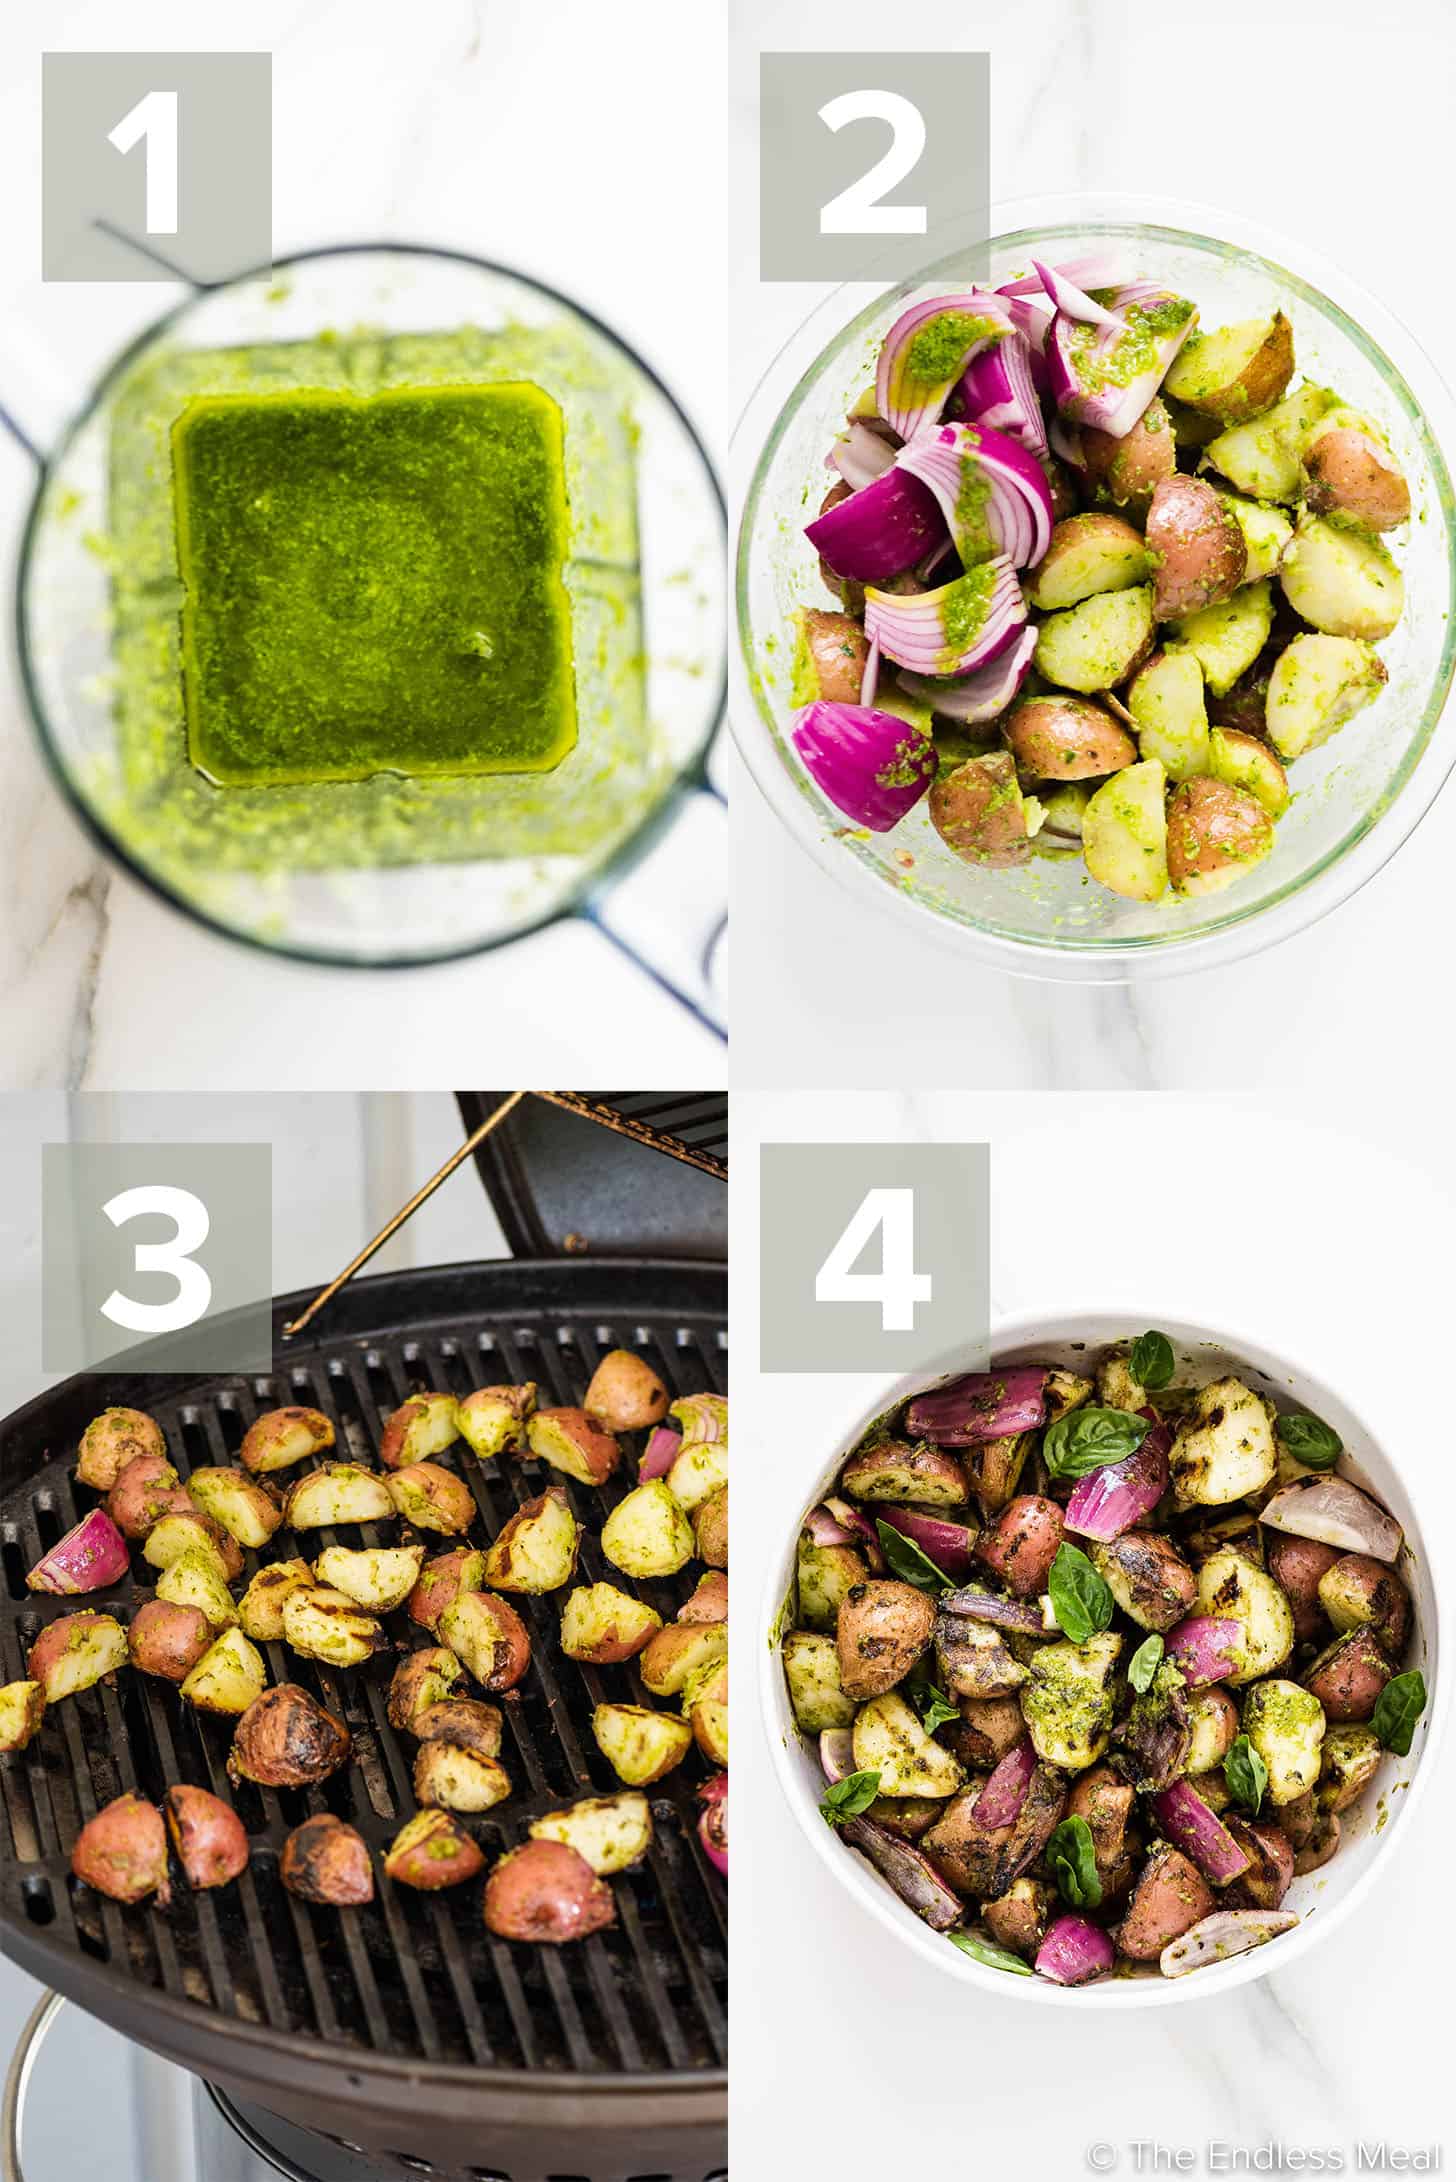 4 pictures showing how to make Grilled Potato Salad